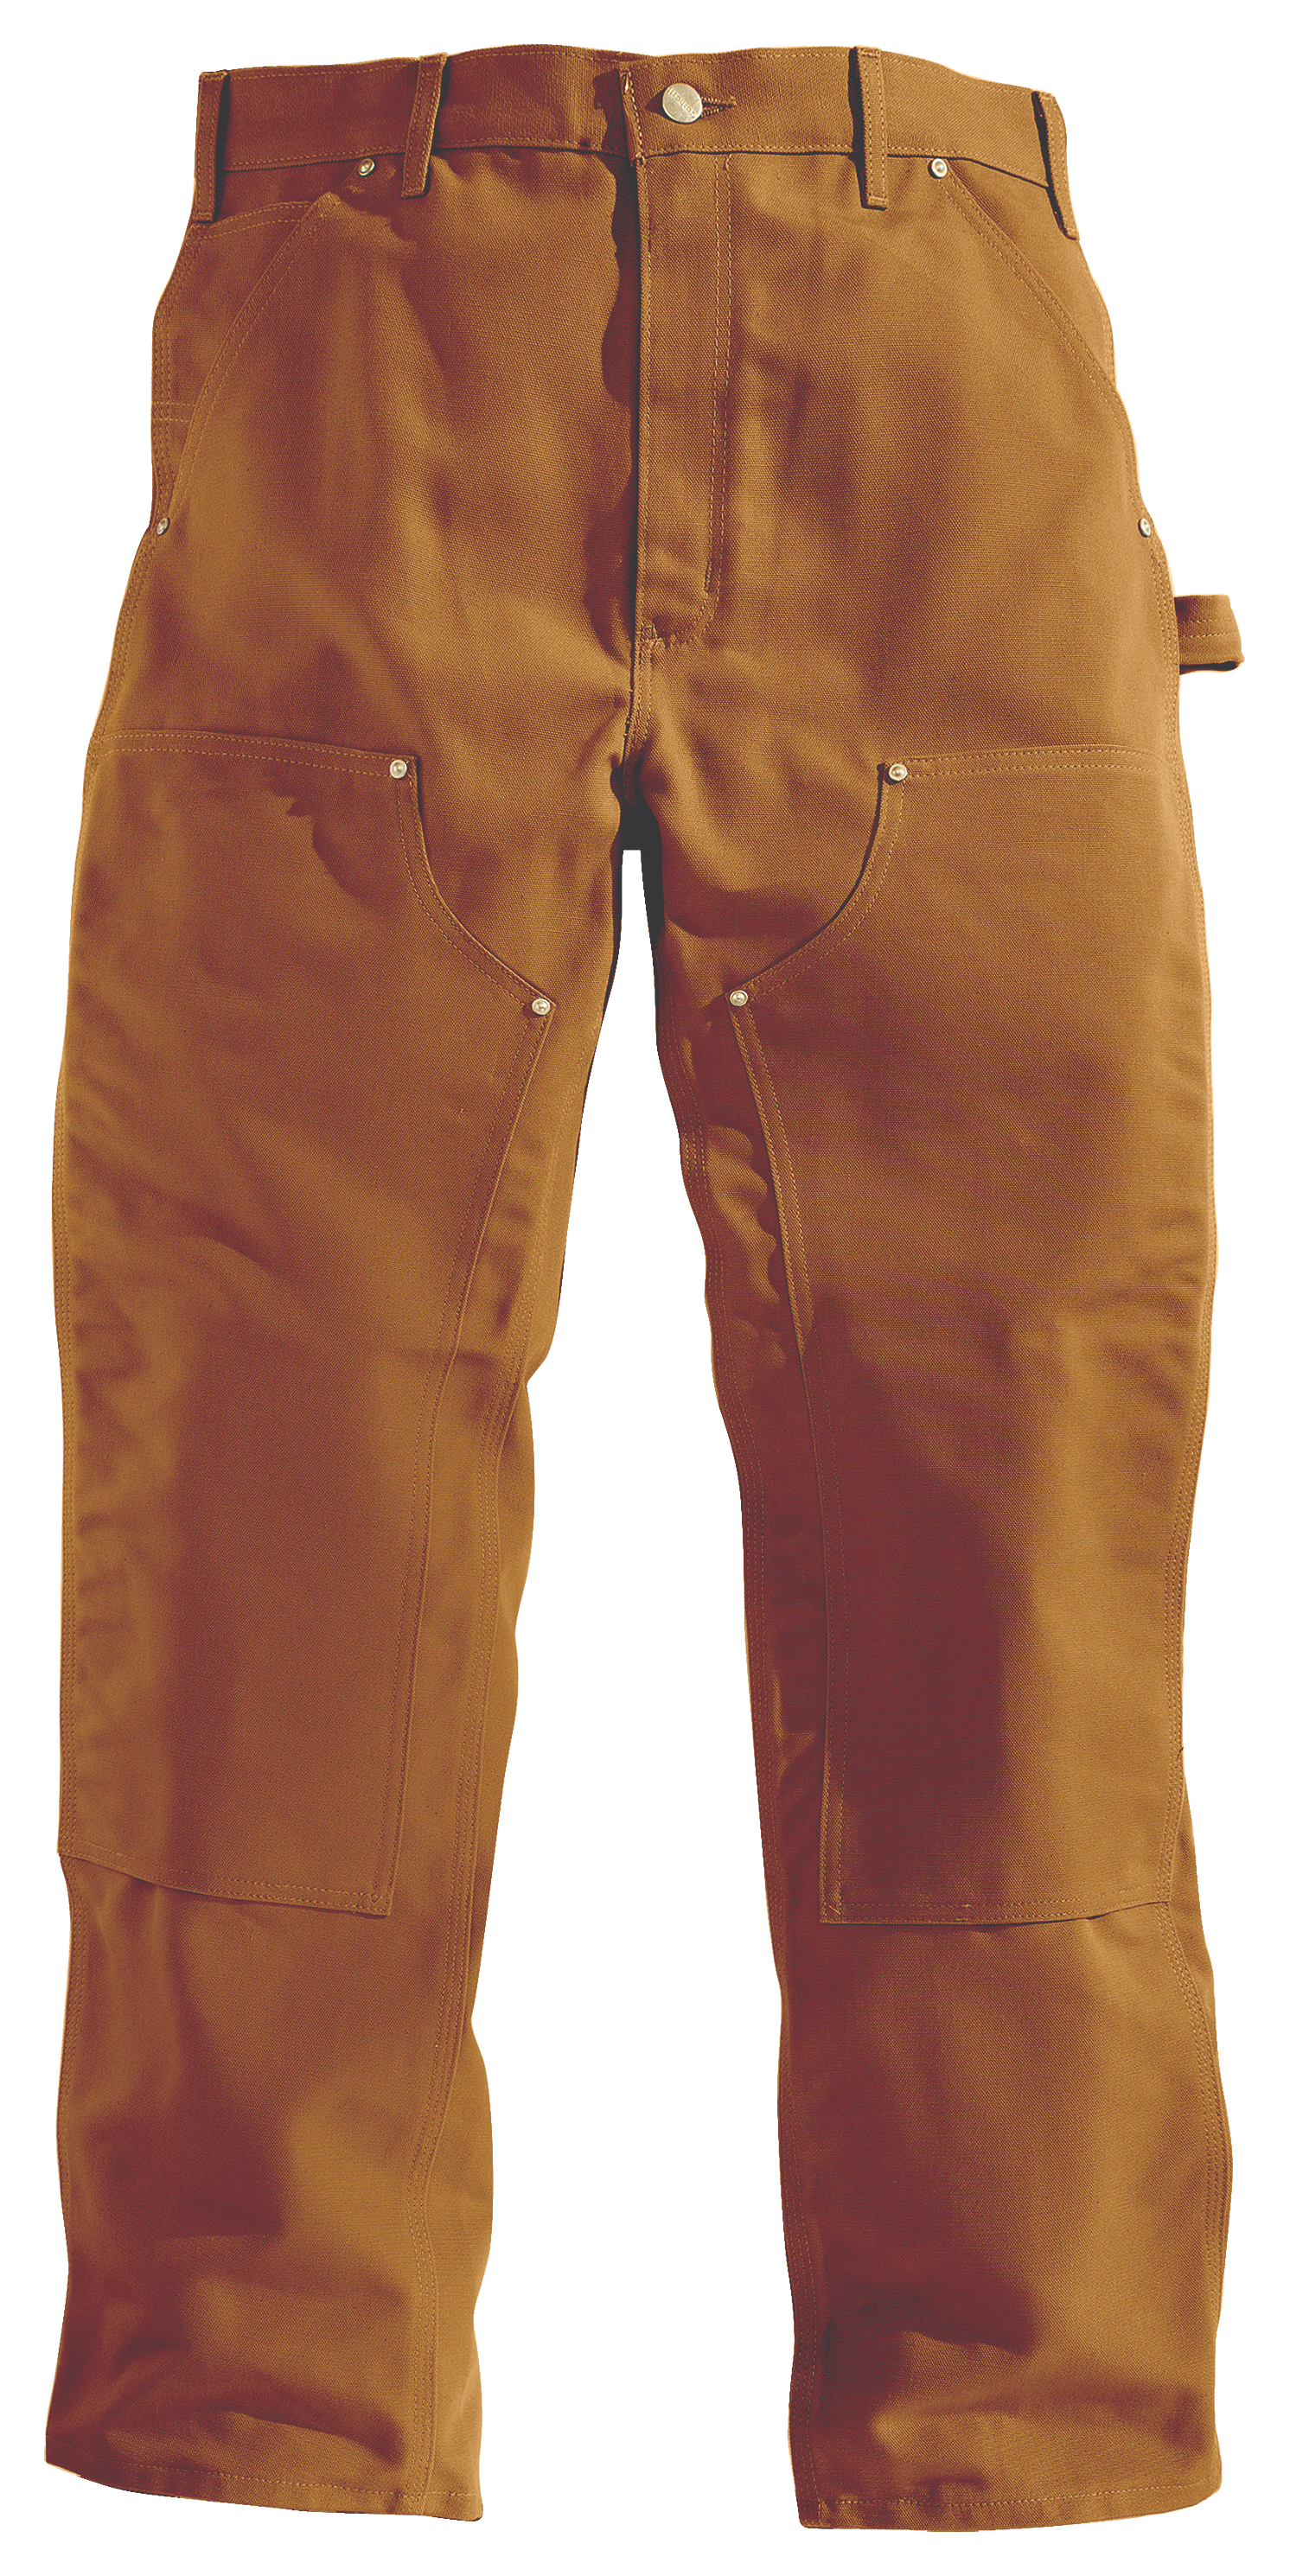 Carhartt Men's Double Front Work Dungarees, Brown, Size 34